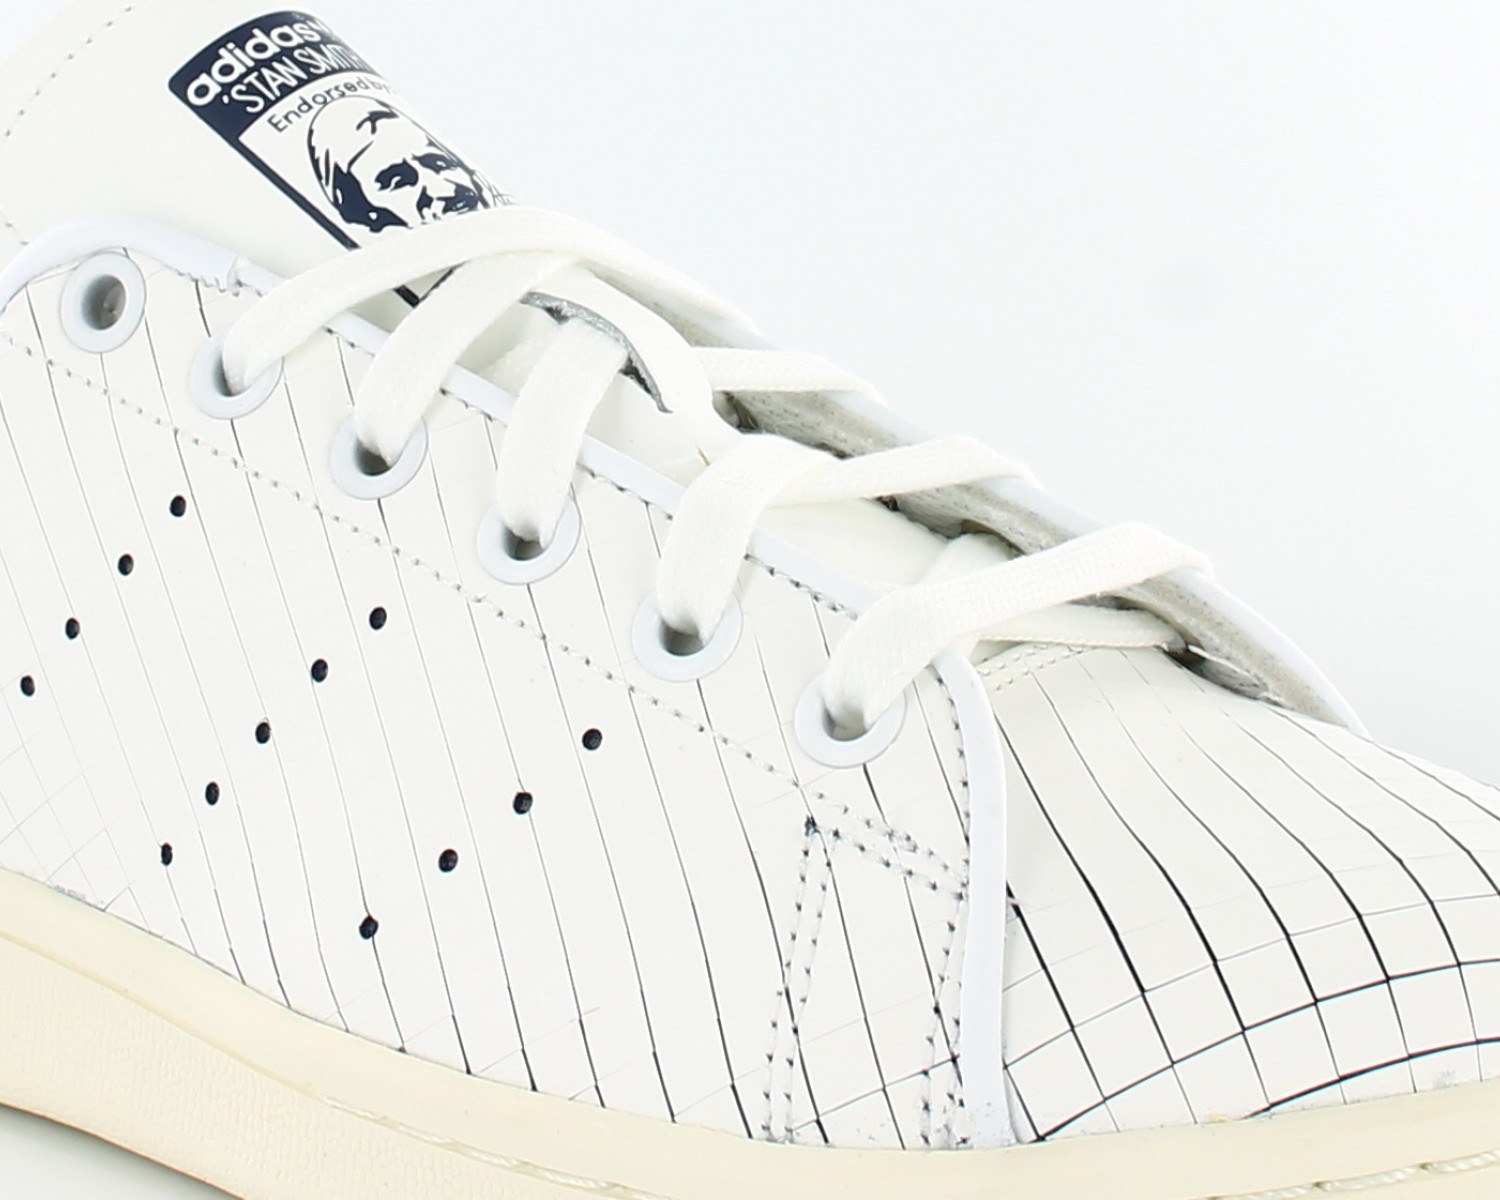 stan smith ecaille femme chaussure